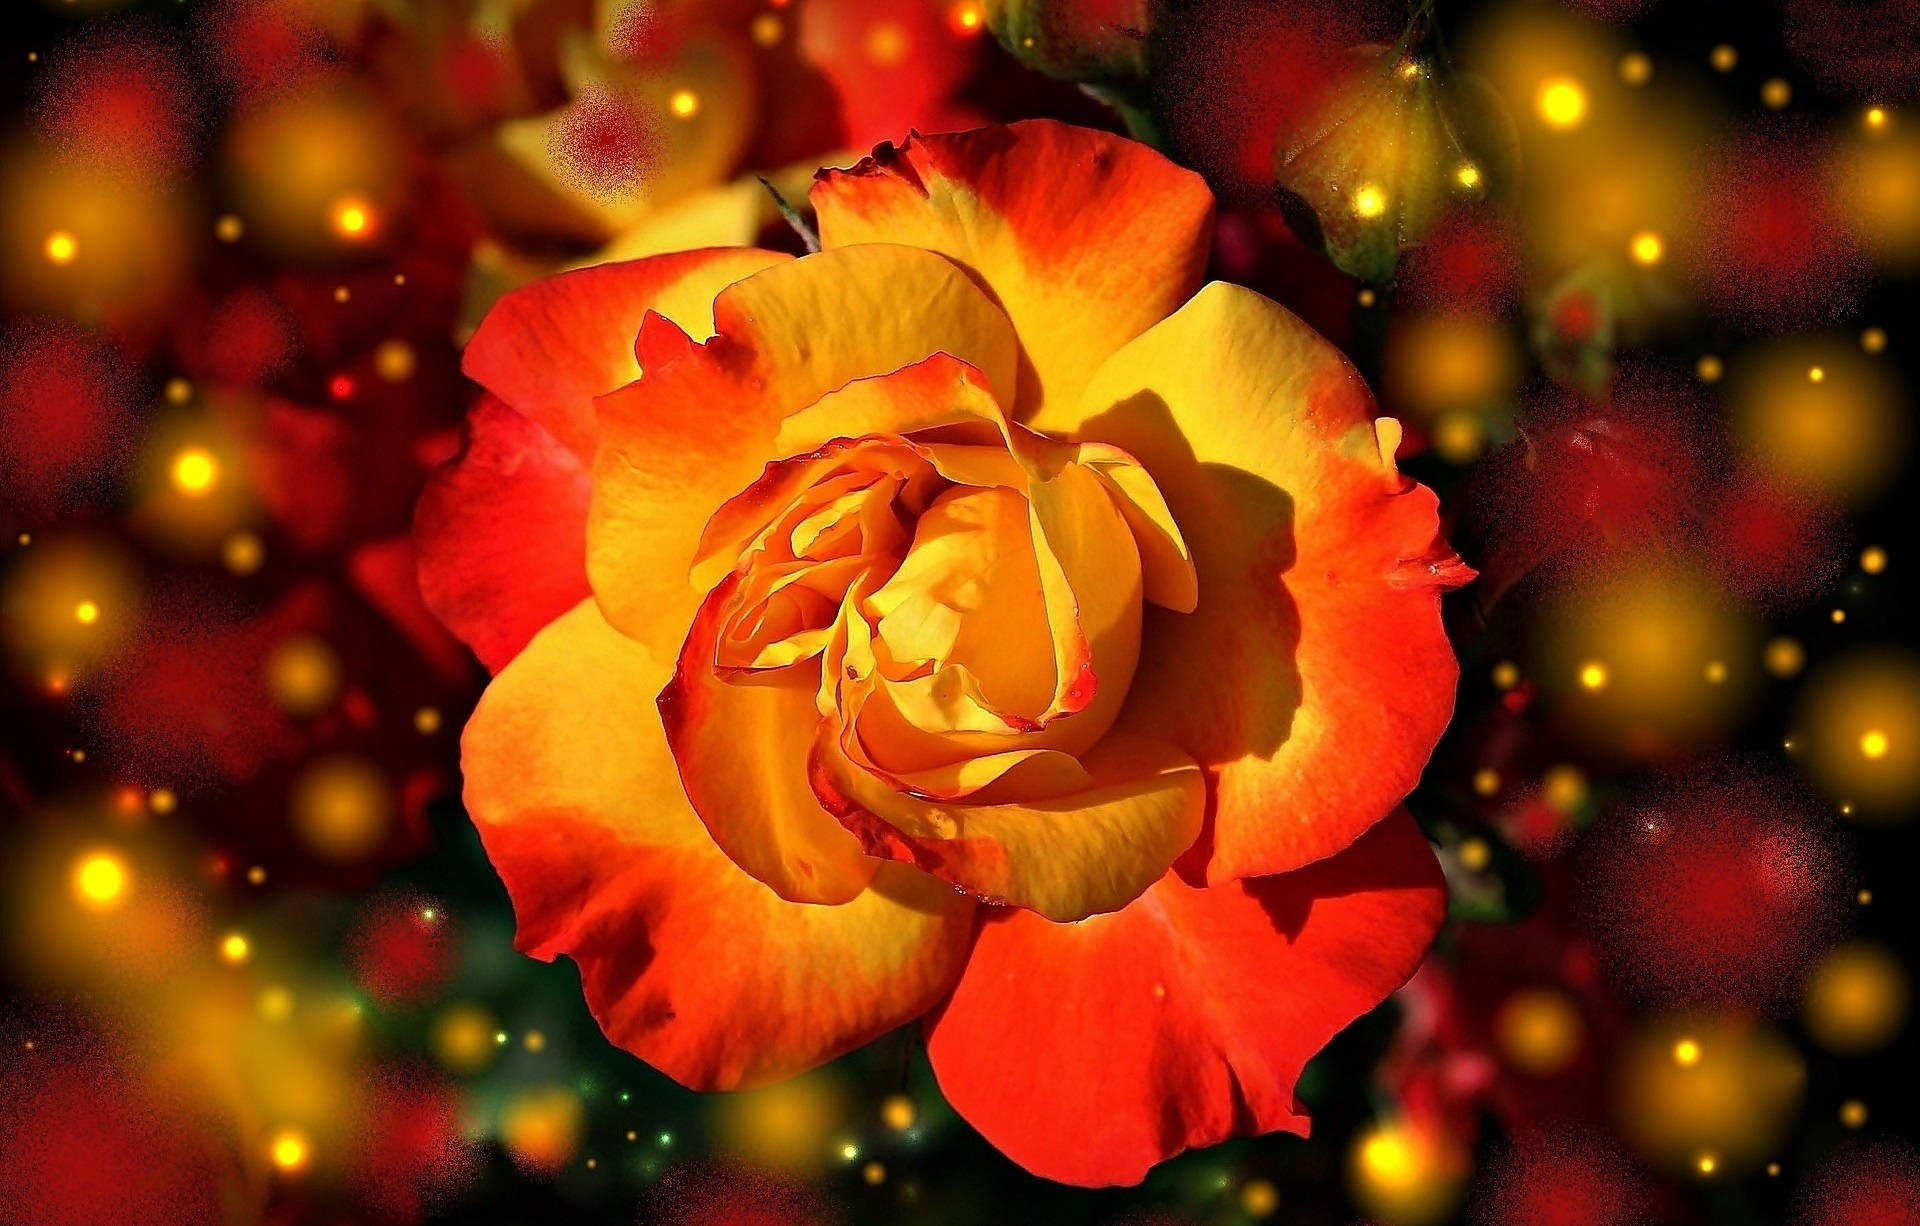 Orange And Yellow Rose With Lights Background